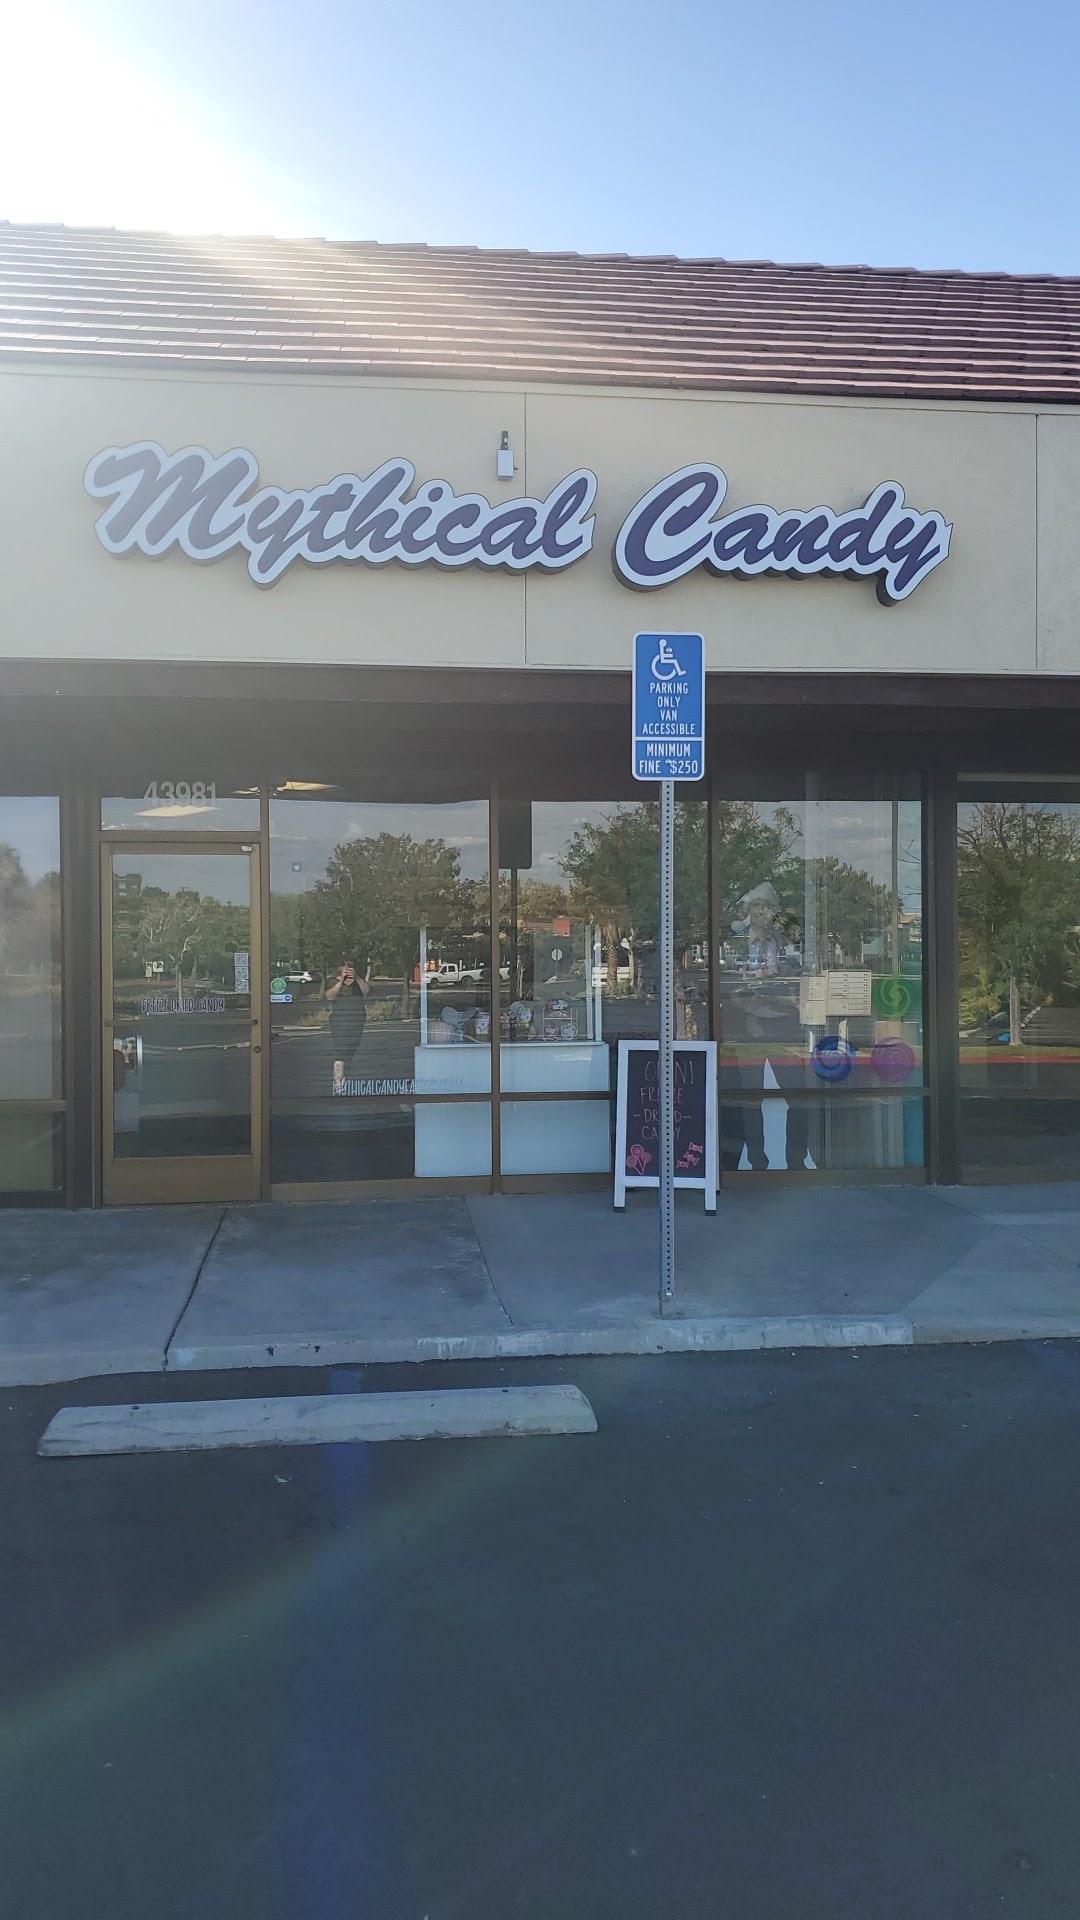 Mythical candy factory